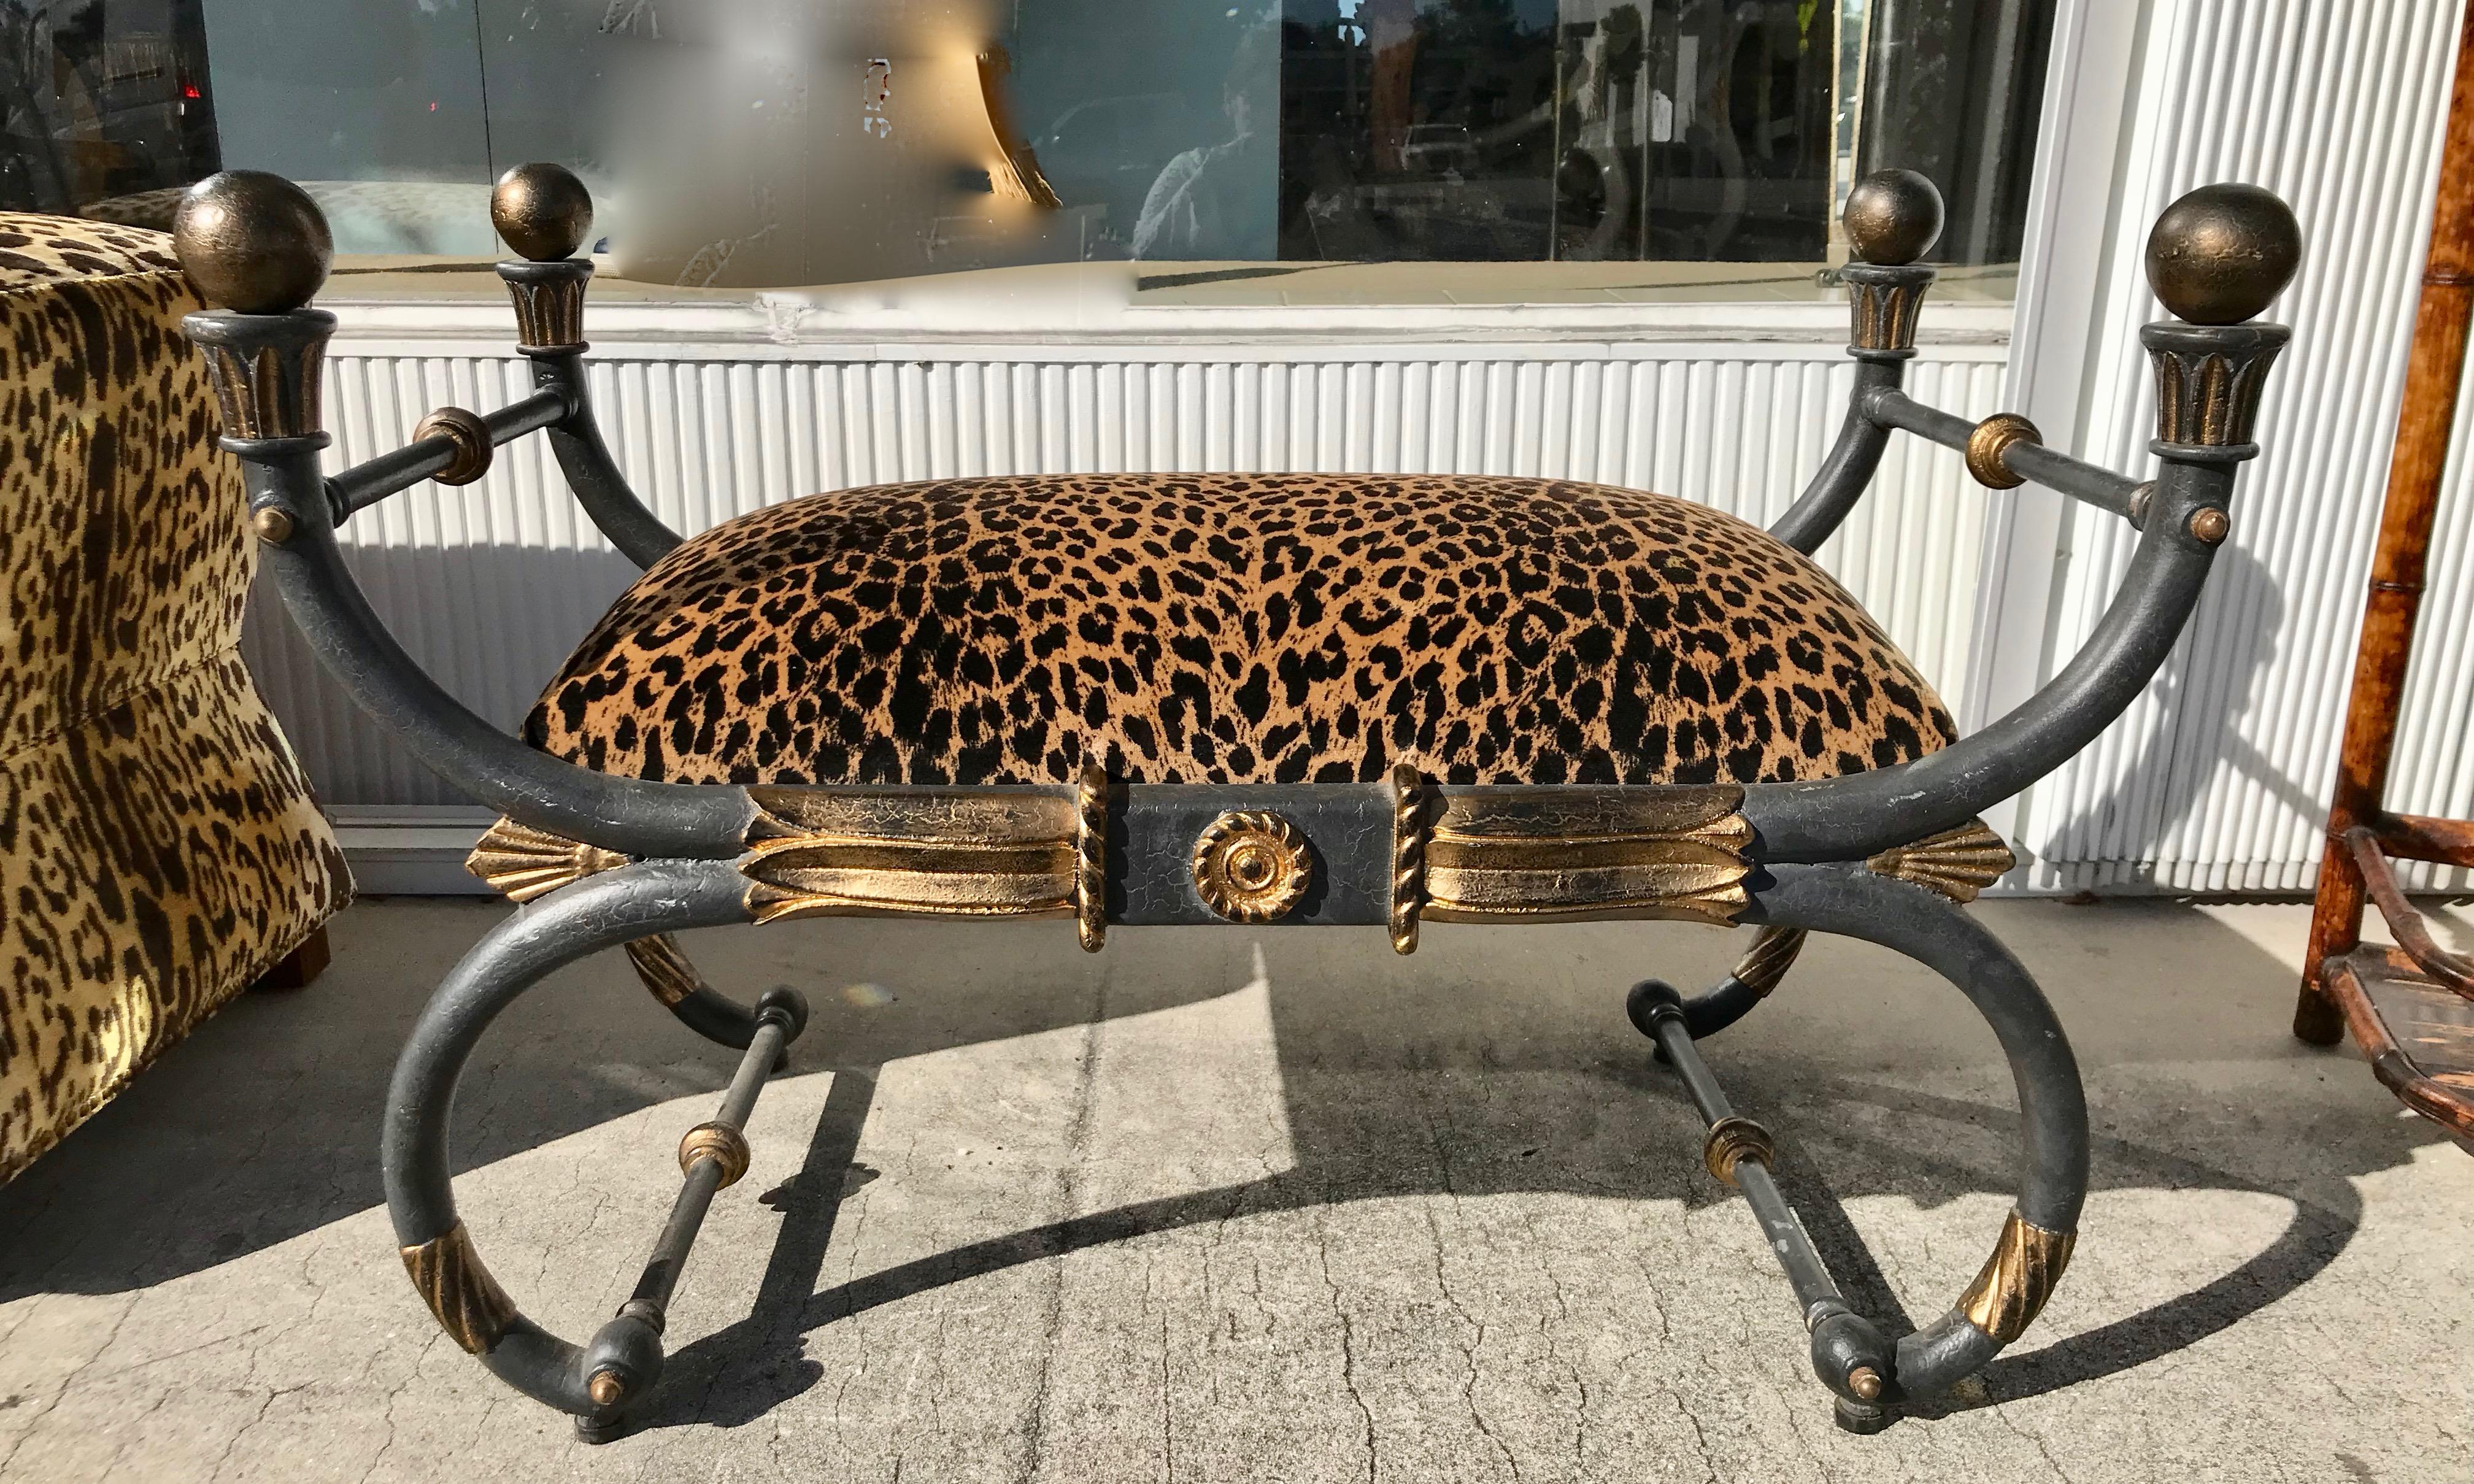 Fabulous eye catching quality.
The bench is appointed with gilt highlights and upholstered in a stunning
faux leopard fabric.